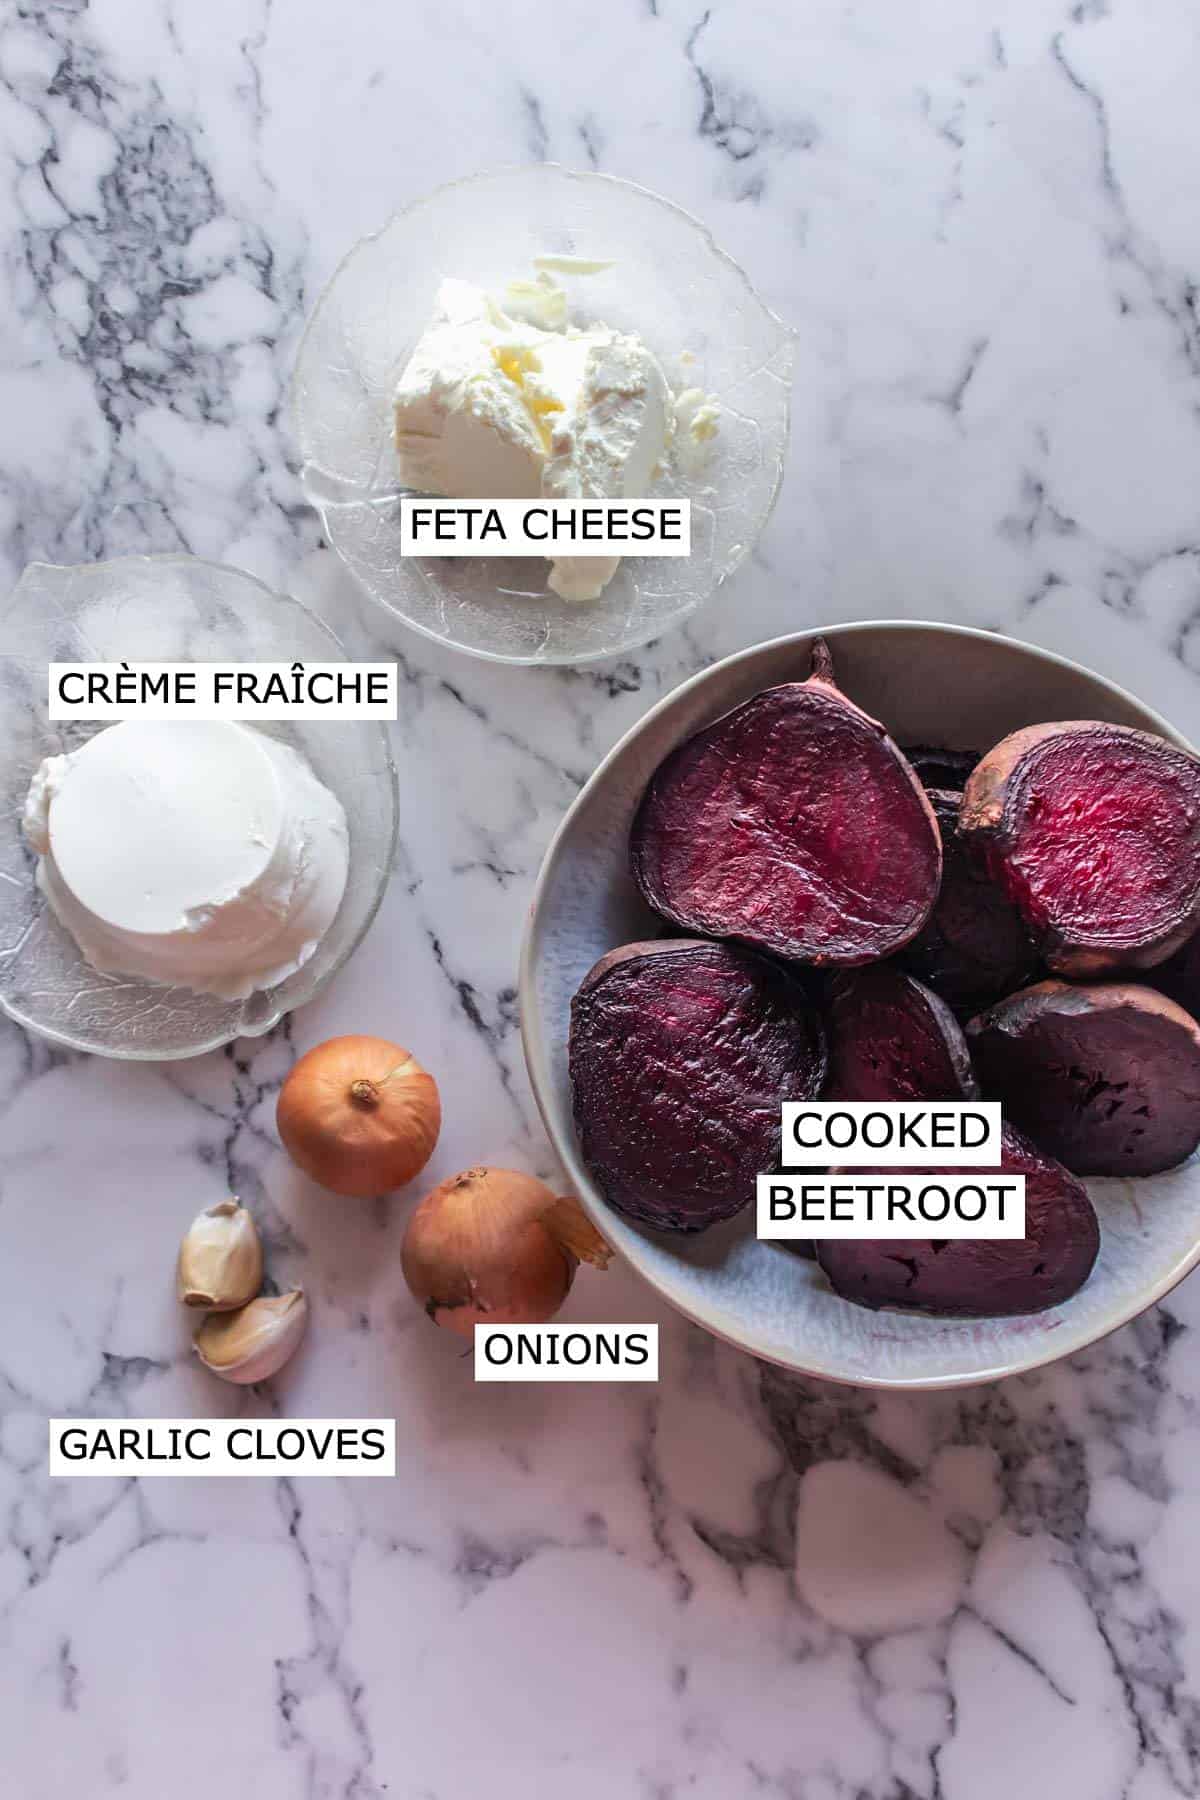 Feta Cheese, creme fraiche,cooked beetroot, onions and garlic.